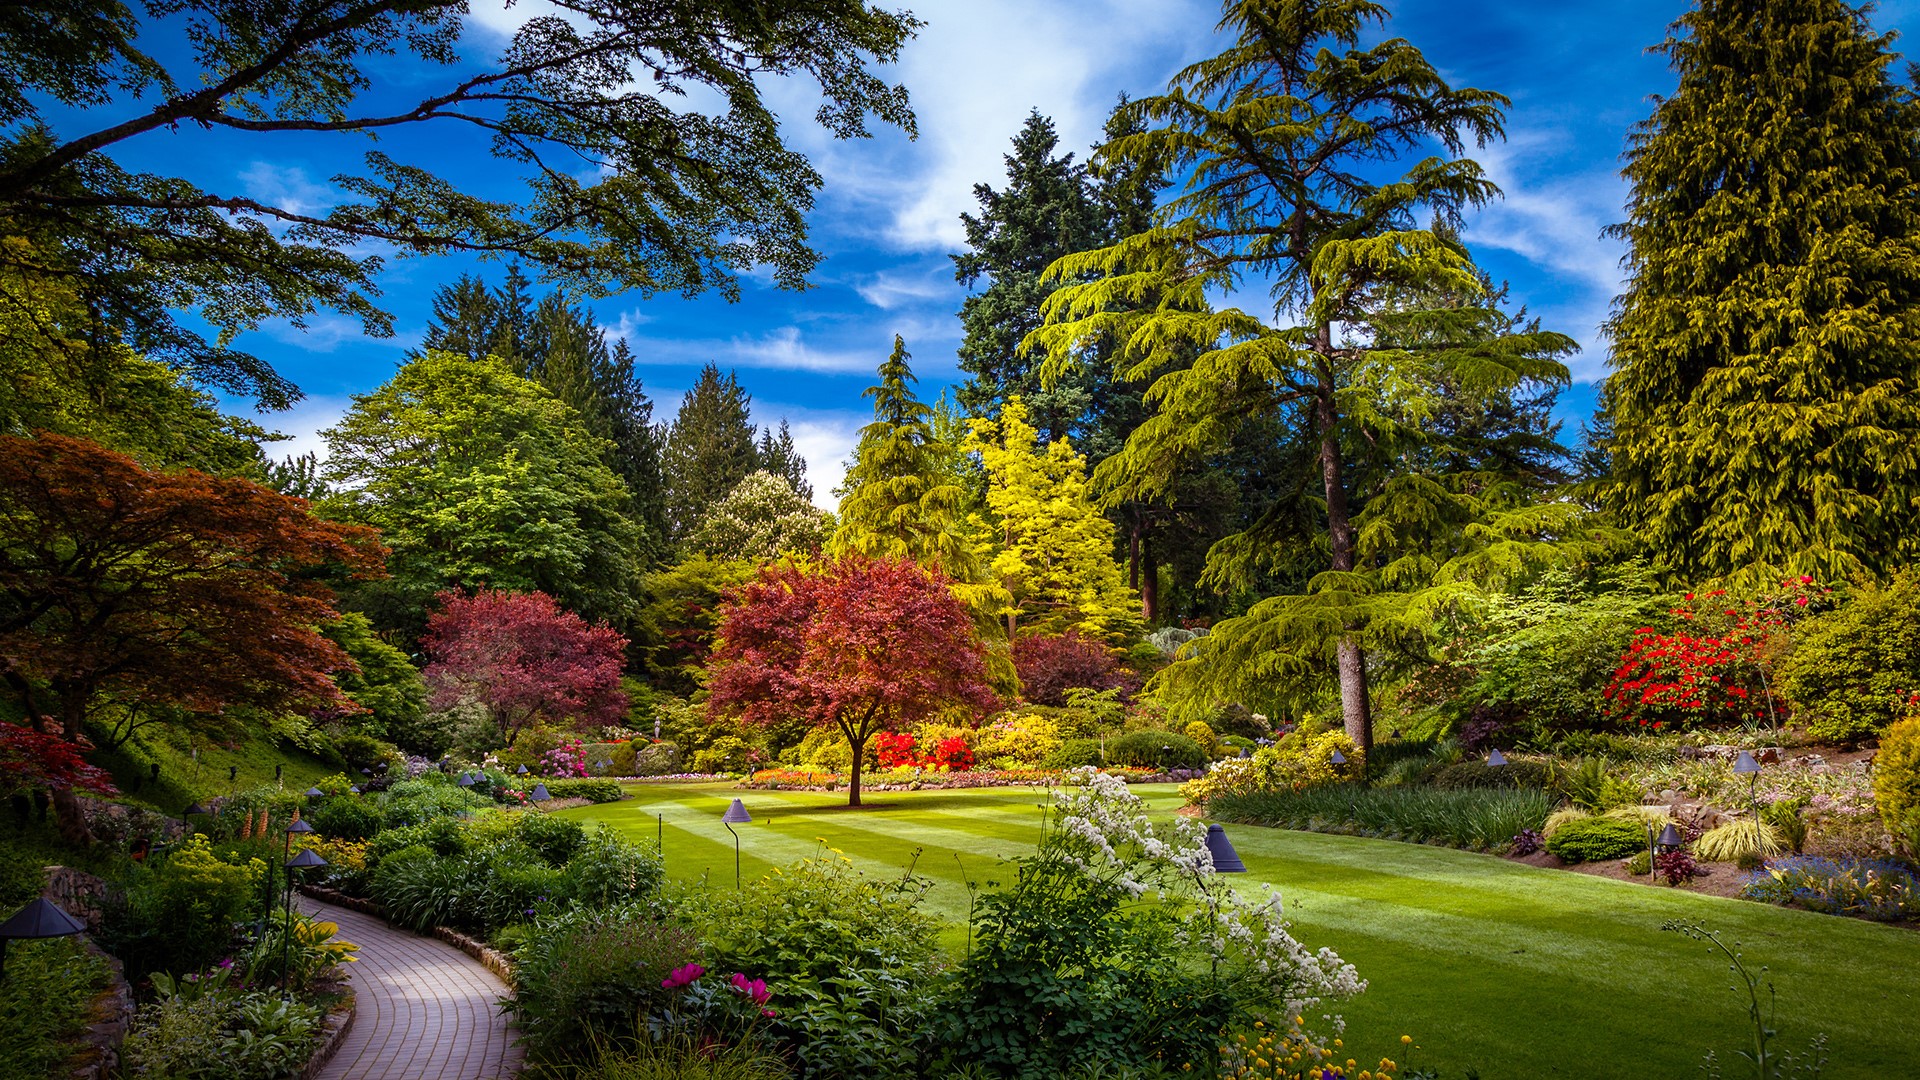 General 1920x1080 nature landscape trees plants grass walkway flowers clouds sky The Butchart Gardens British Columbia Canada